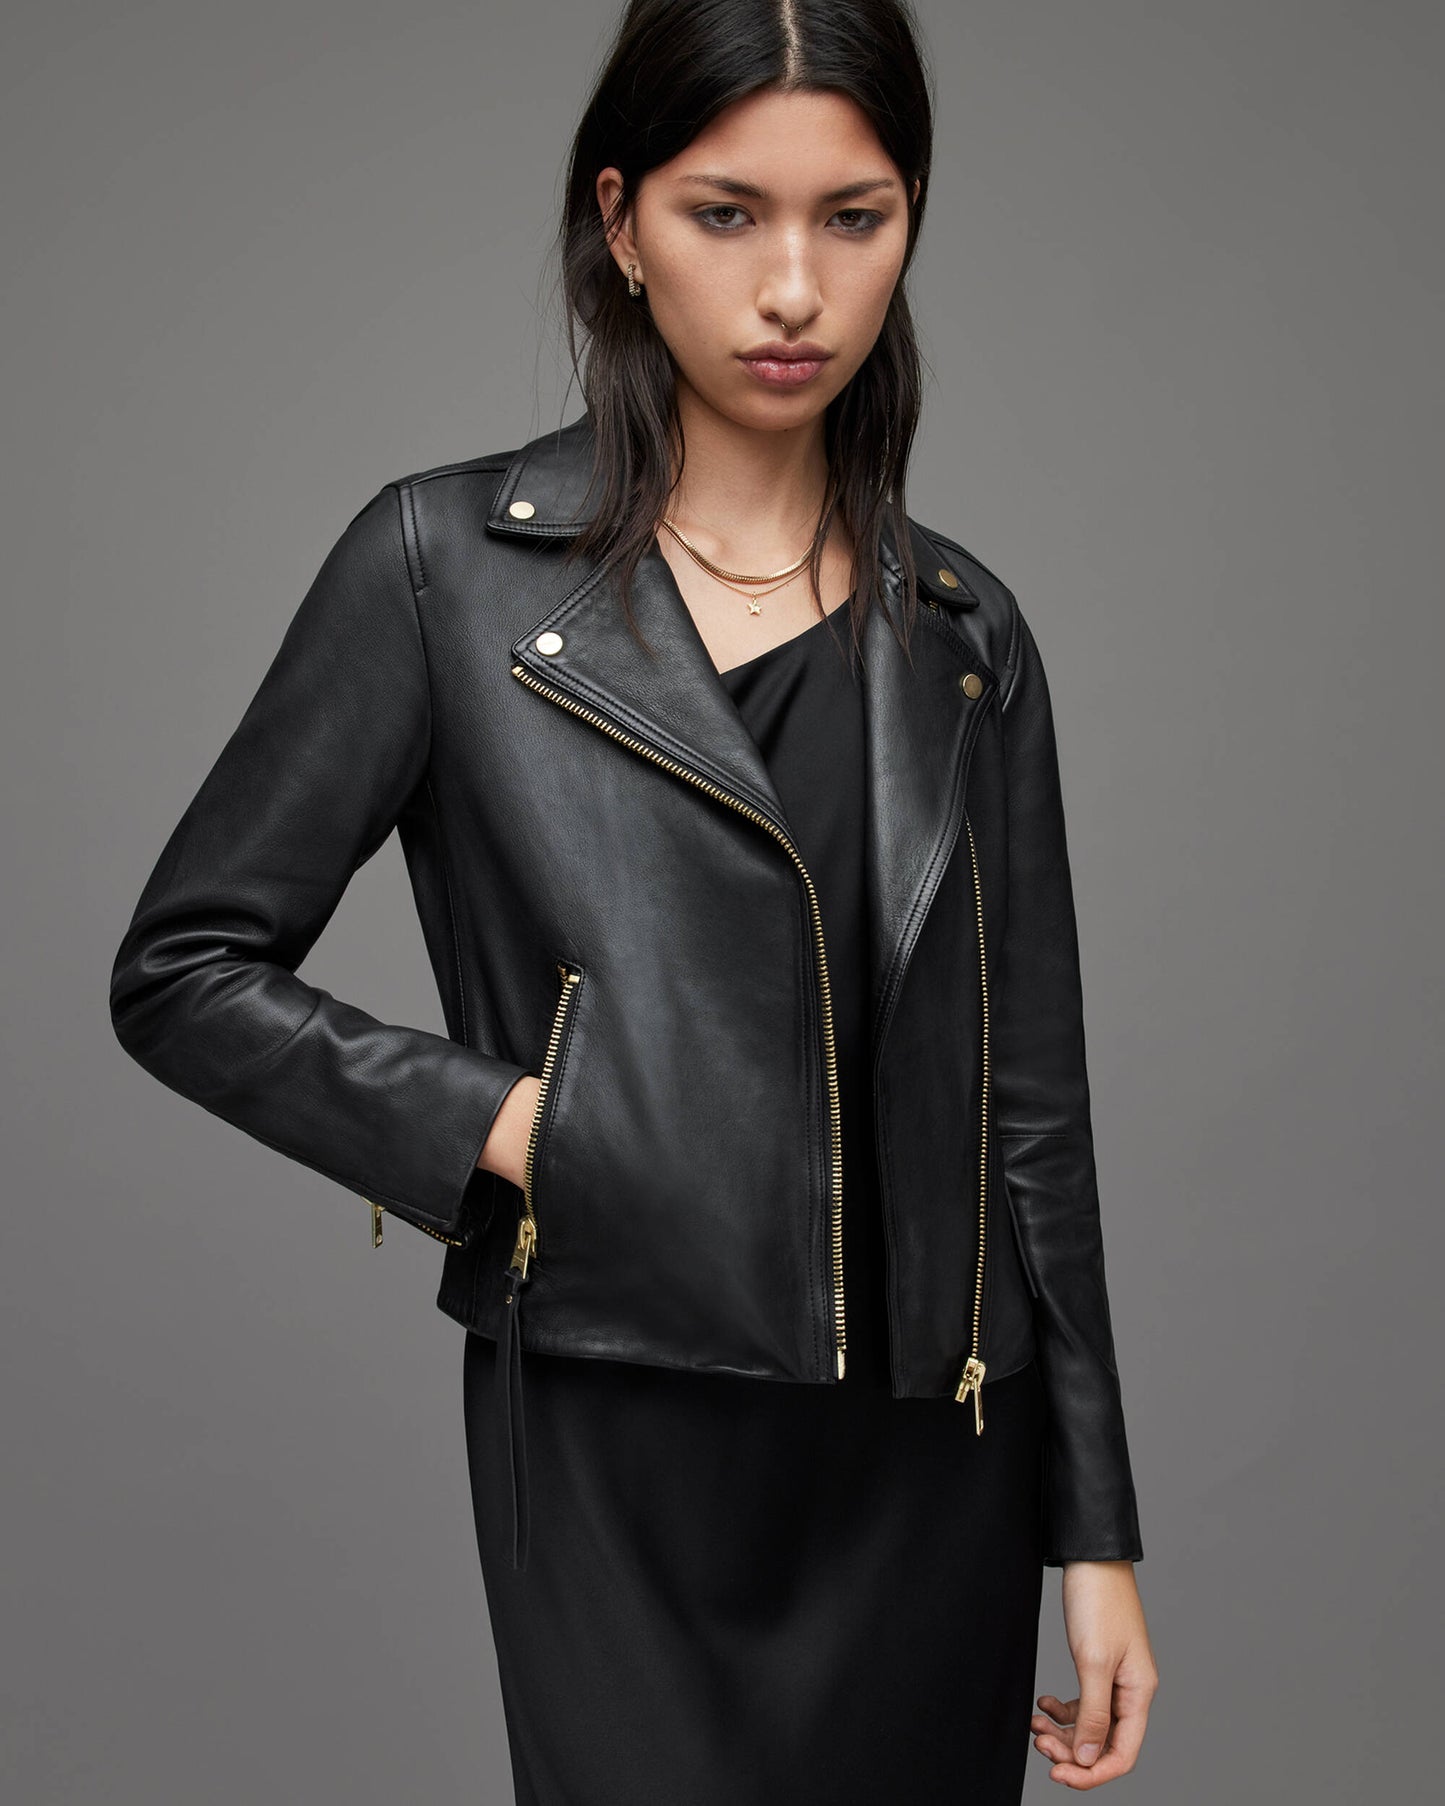 Women's Black Leather Biker Jacket With Gold Tone Zippers